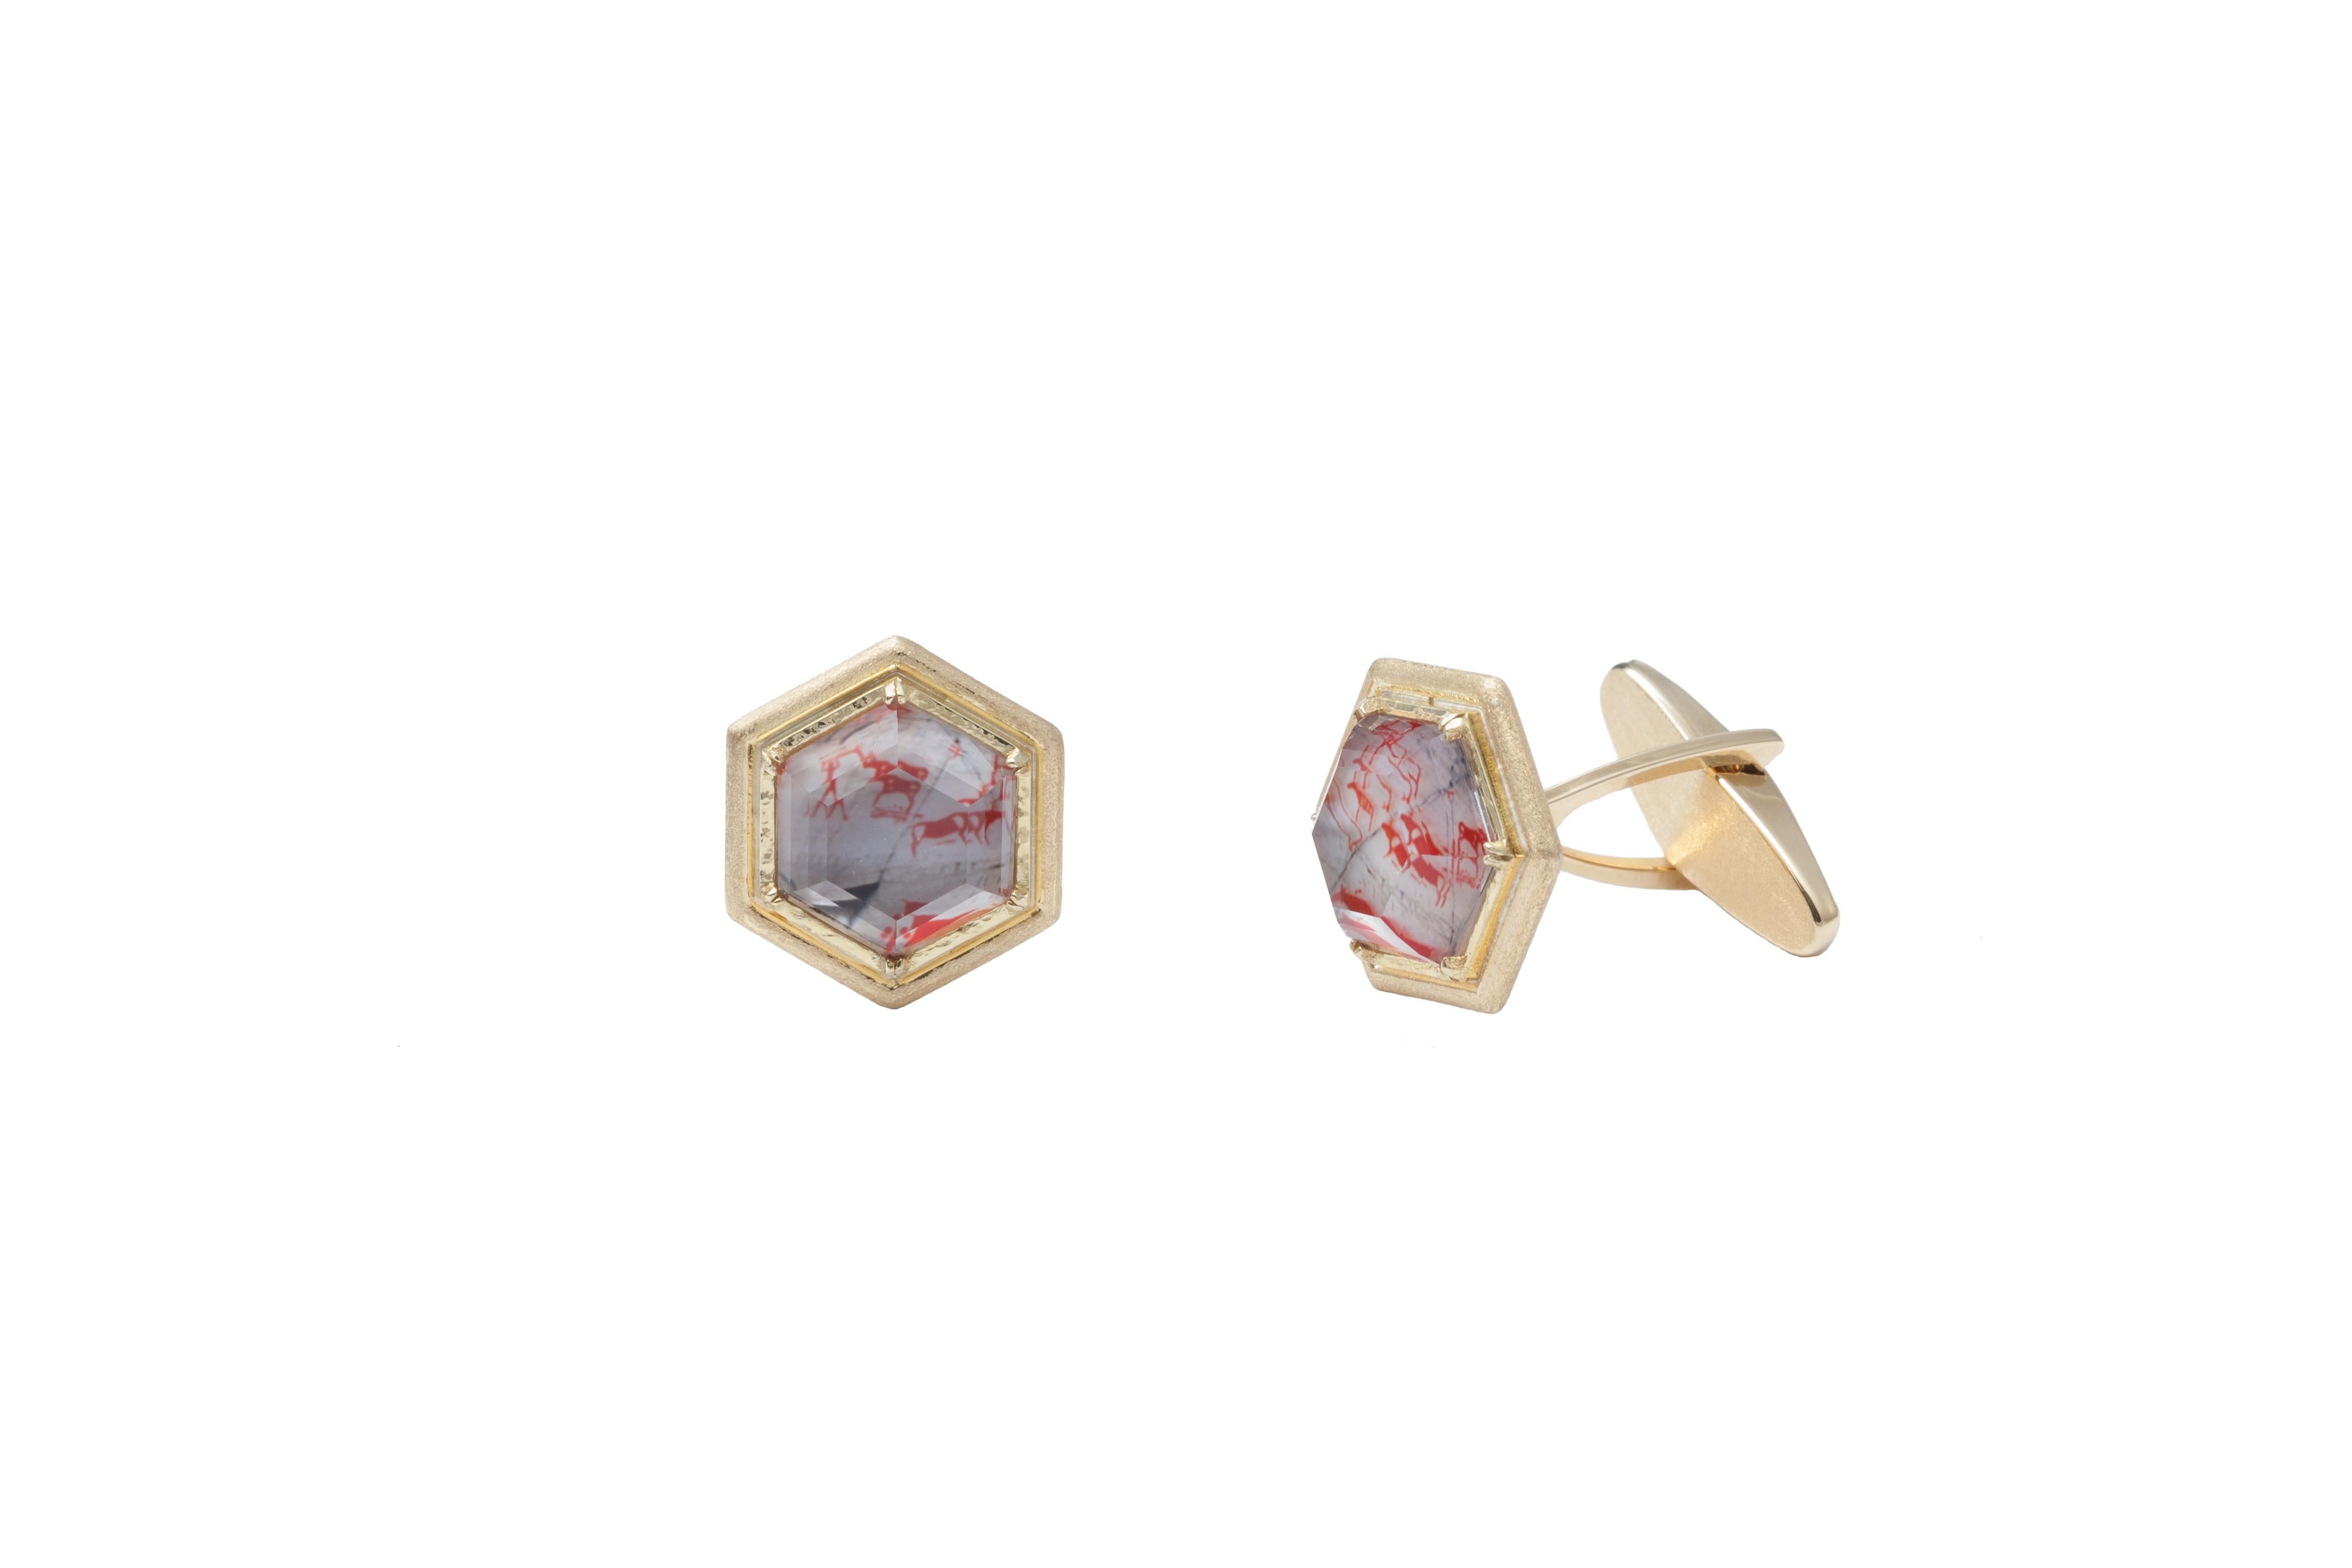 From Award Winning Acclaimed Designer Melissa Spencer.  One of a kind Portrait Cufflinks within Rock Crystal Quartz and Mother of Pearl in 18K Yellow Gold.  The portrait is of cave paintings and is fashioned through a proprietary process of